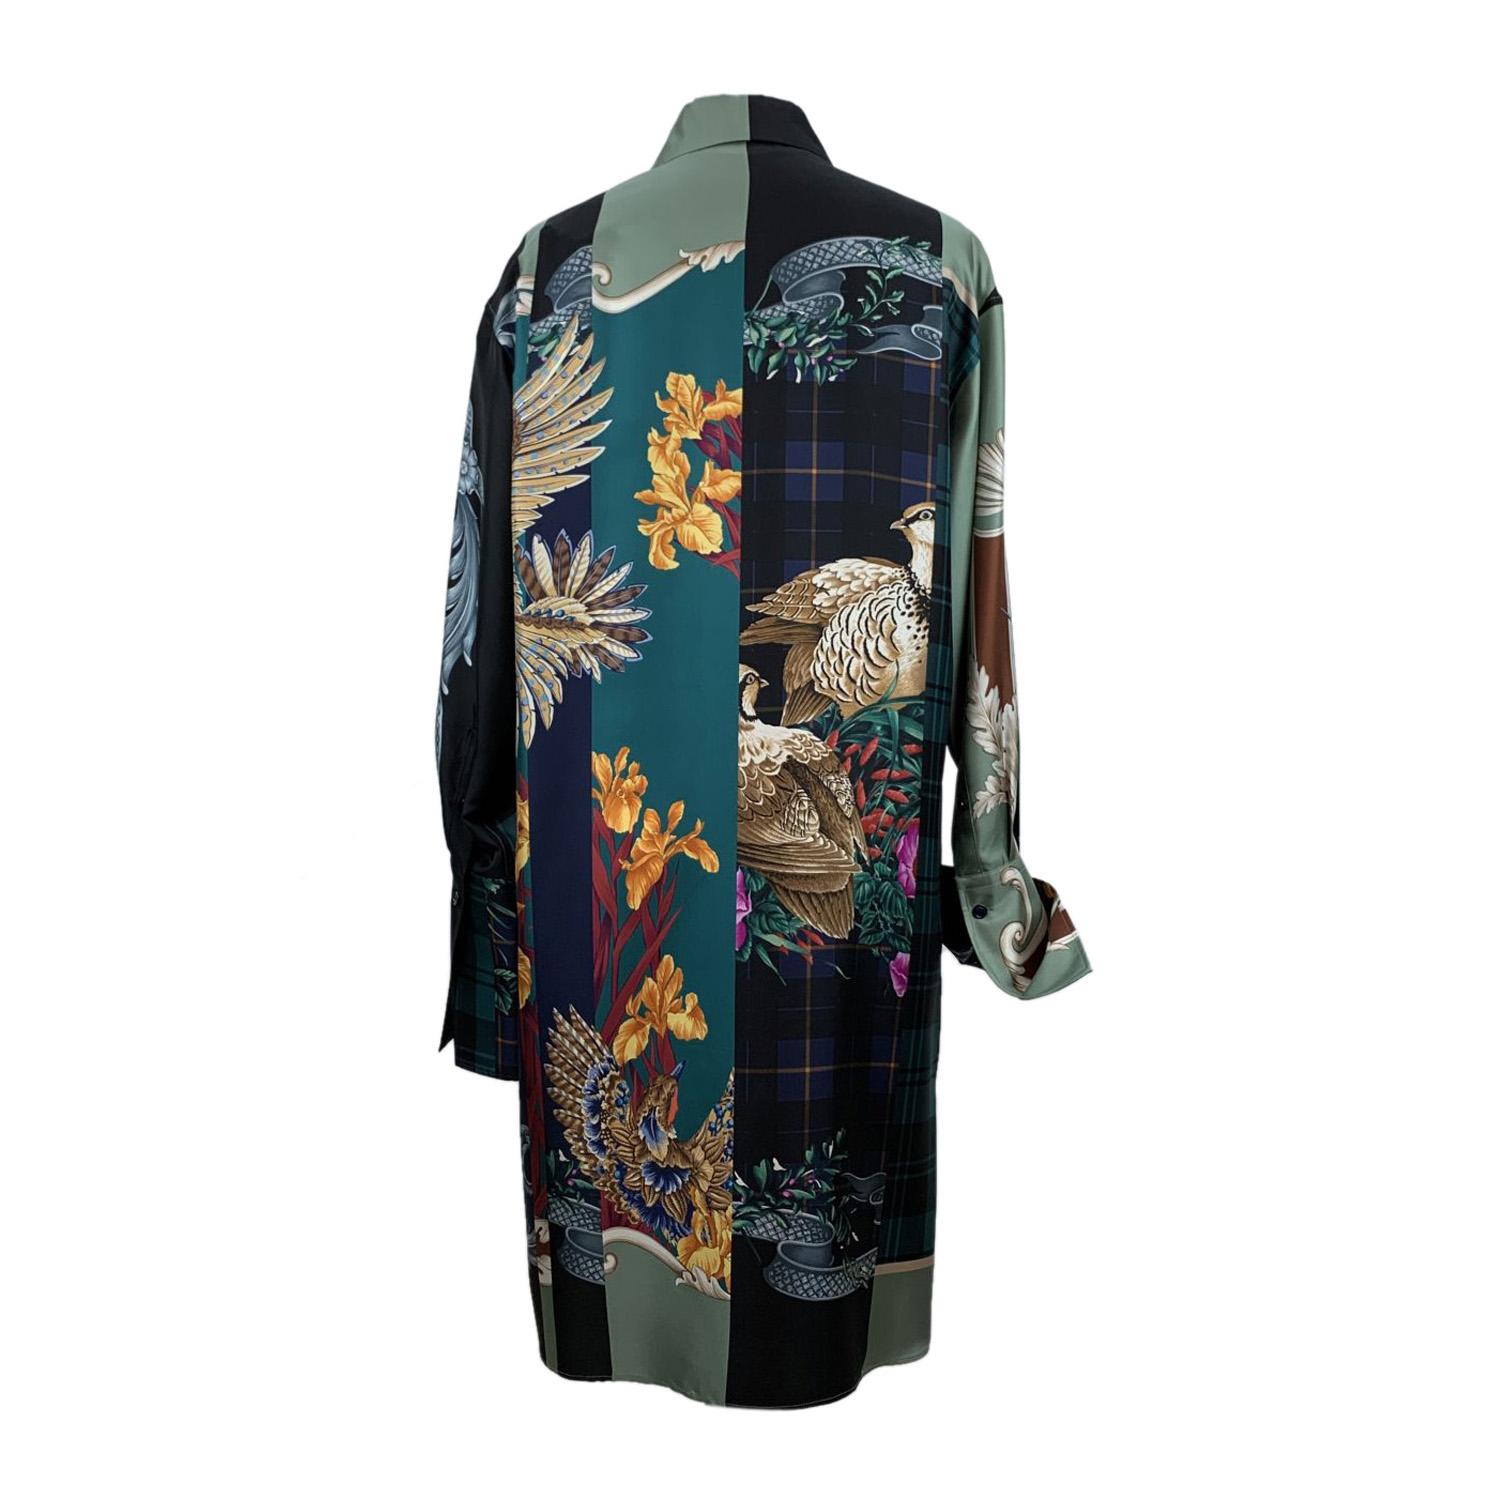 Salvatore Ferragamo multicolor patchwork printed long-line shirt. Pointed collar. Long sleeve styling with buttoned cuffs. Button placket. Side slits. Composition: 100% silk. Can also be used as a dress. Size: 46 IT (The size shown for this item is